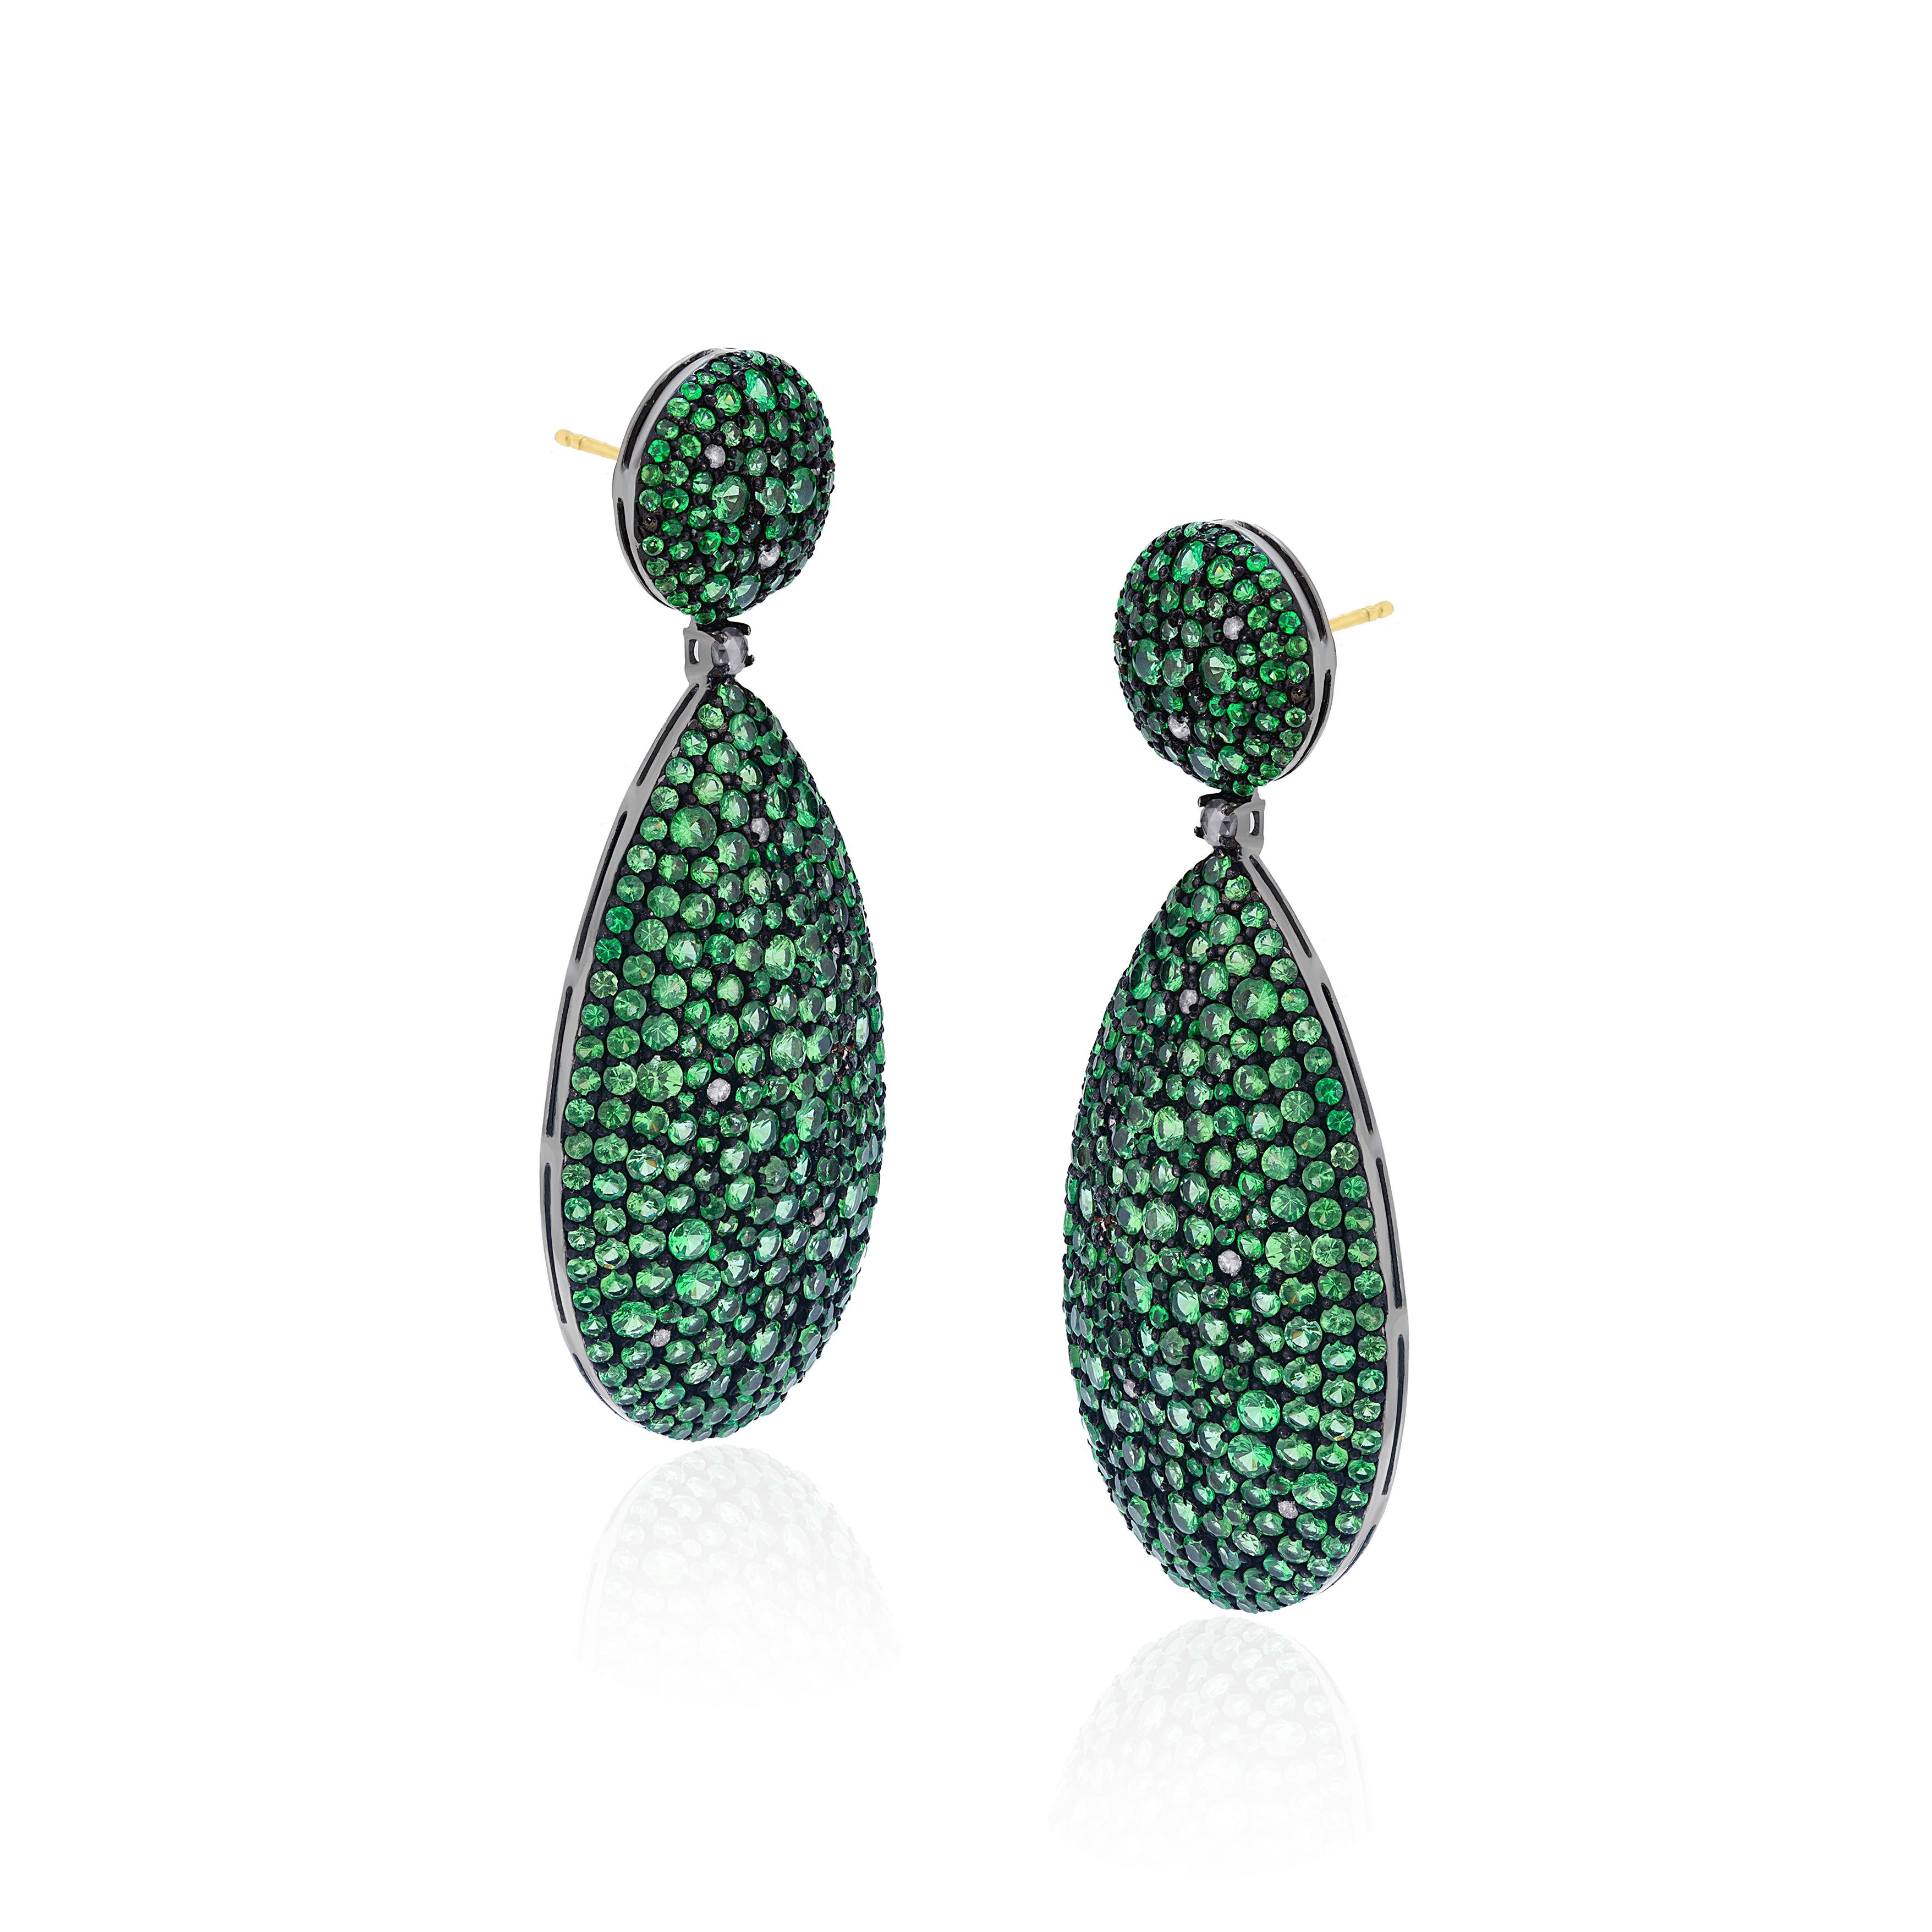 Make a statement with these Gemistry Victorian drop earrings in 18K White Gold & Black Rhodium Silver, inspired by the glitch and glam these pave pear drops of Tsavorite greens accentuated by diamonds sway with glamour from round surmounts of